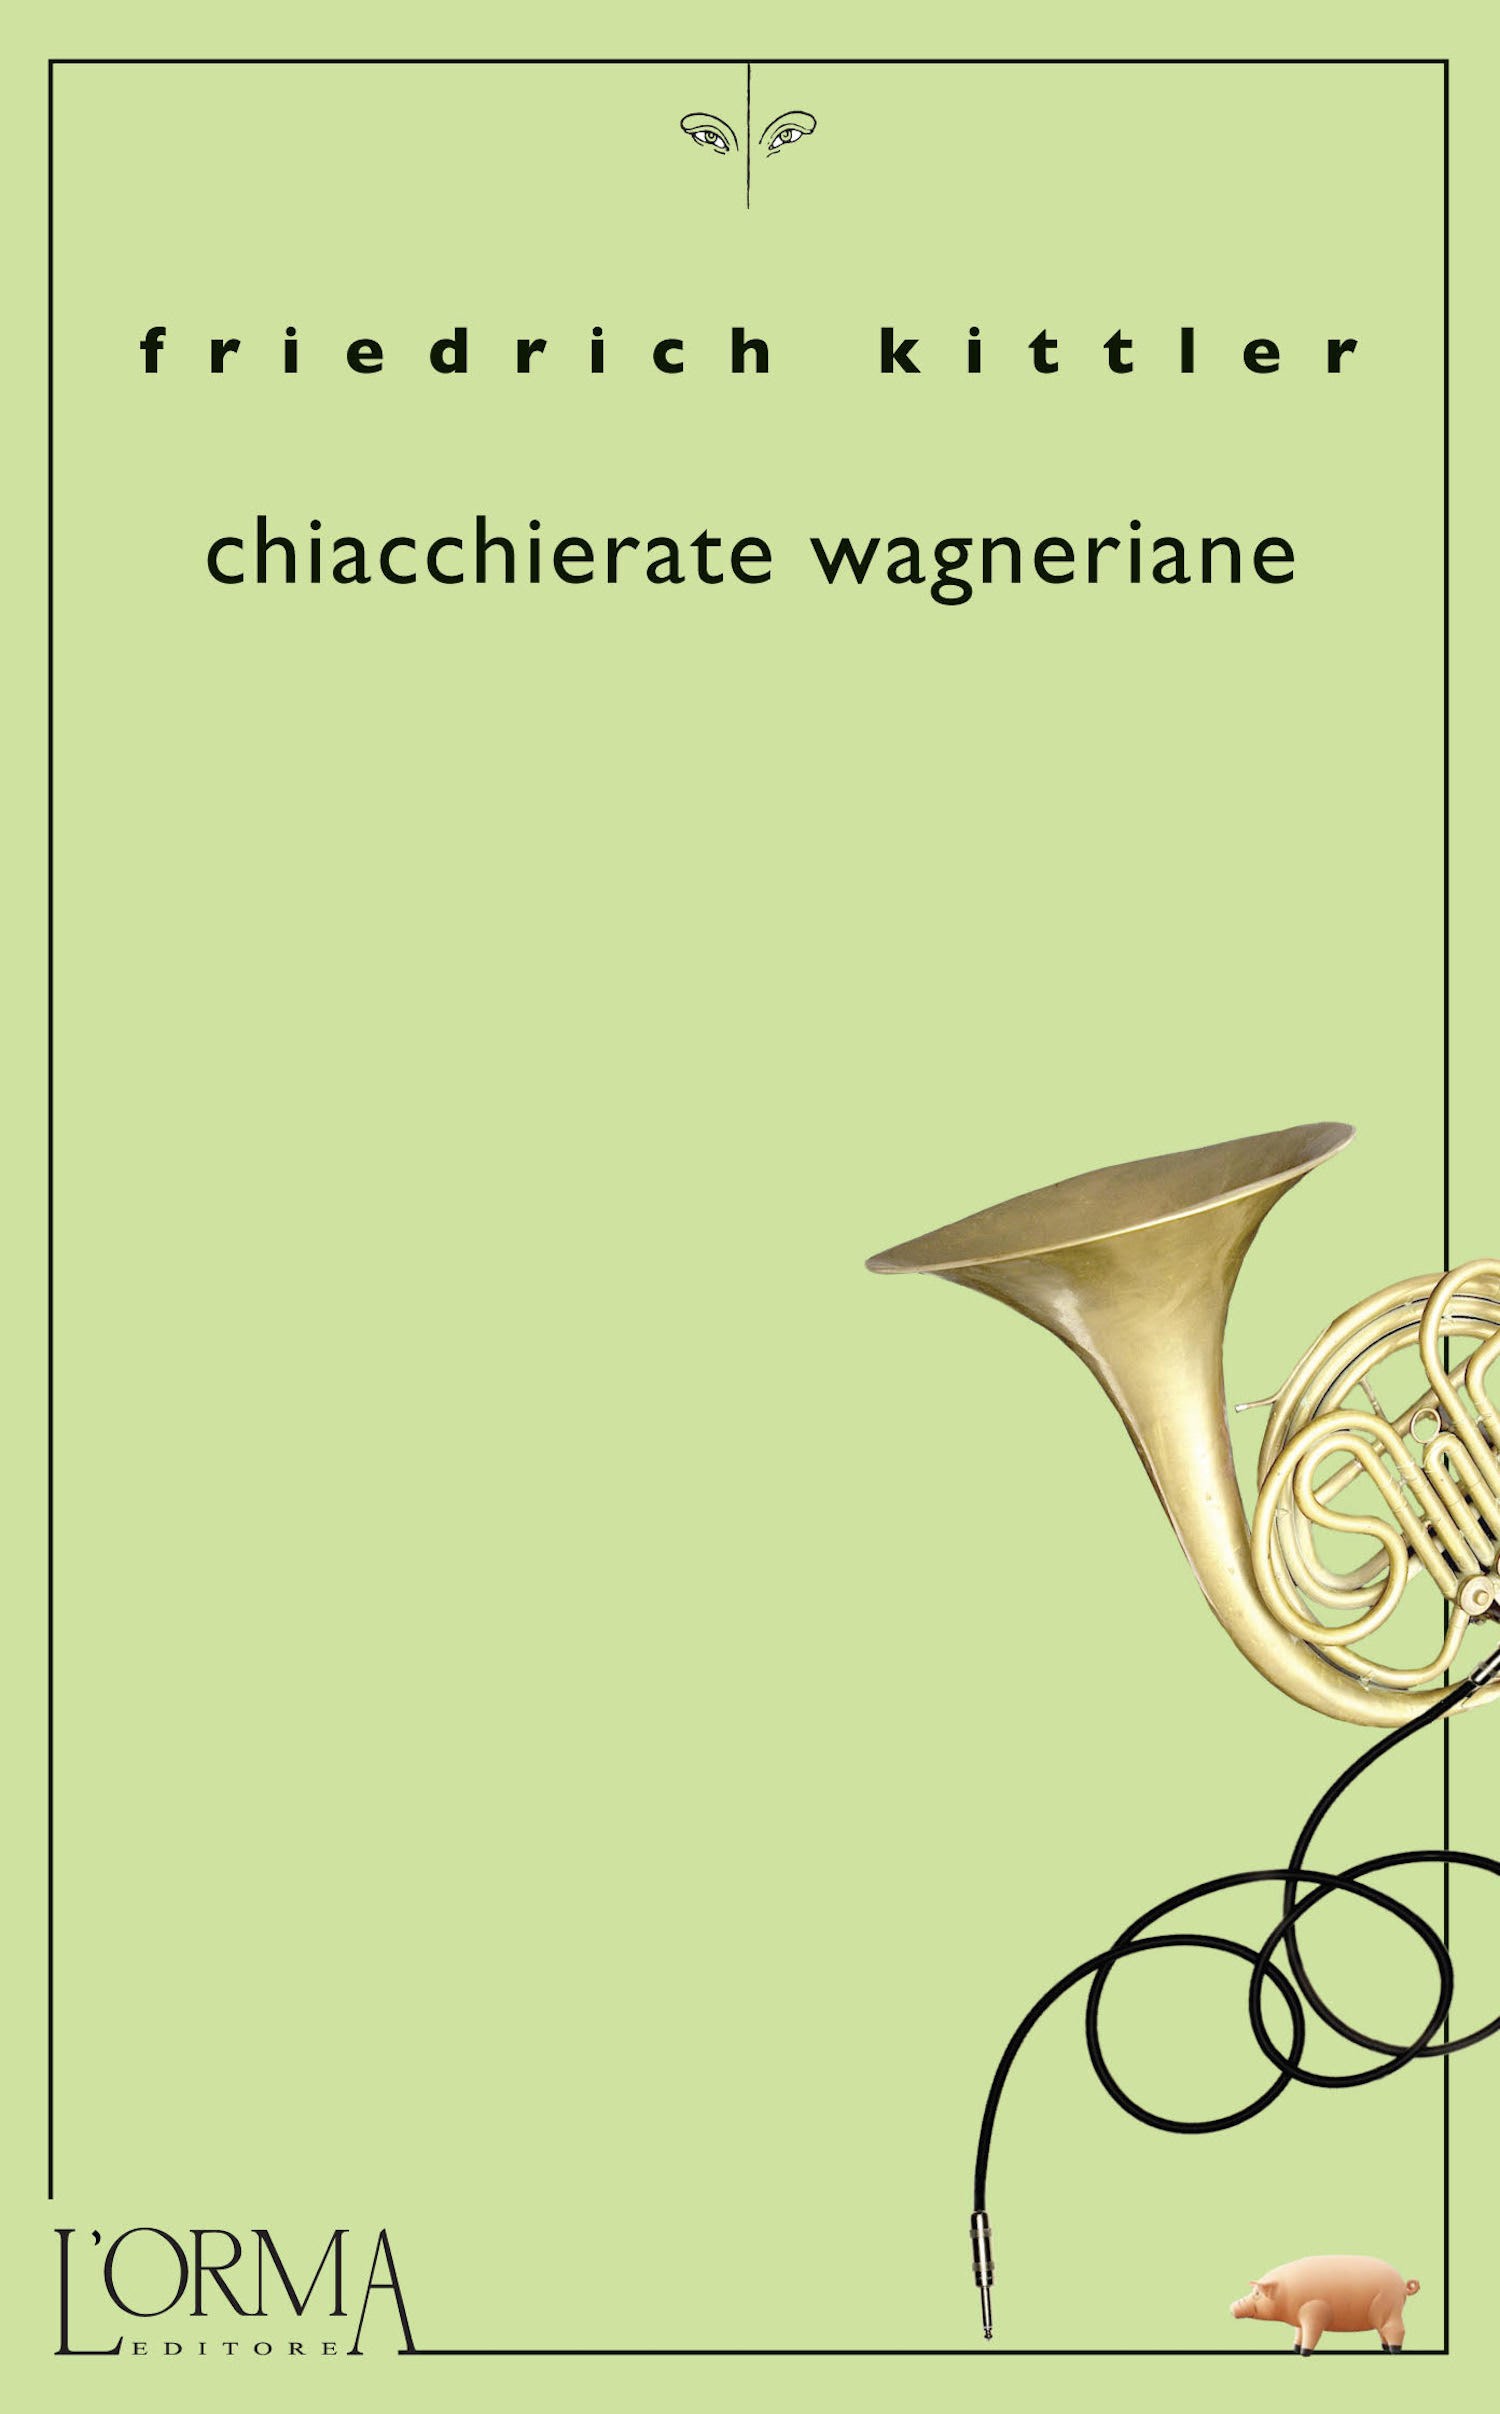 Chiacchierate wagneriane - Librerie.coop